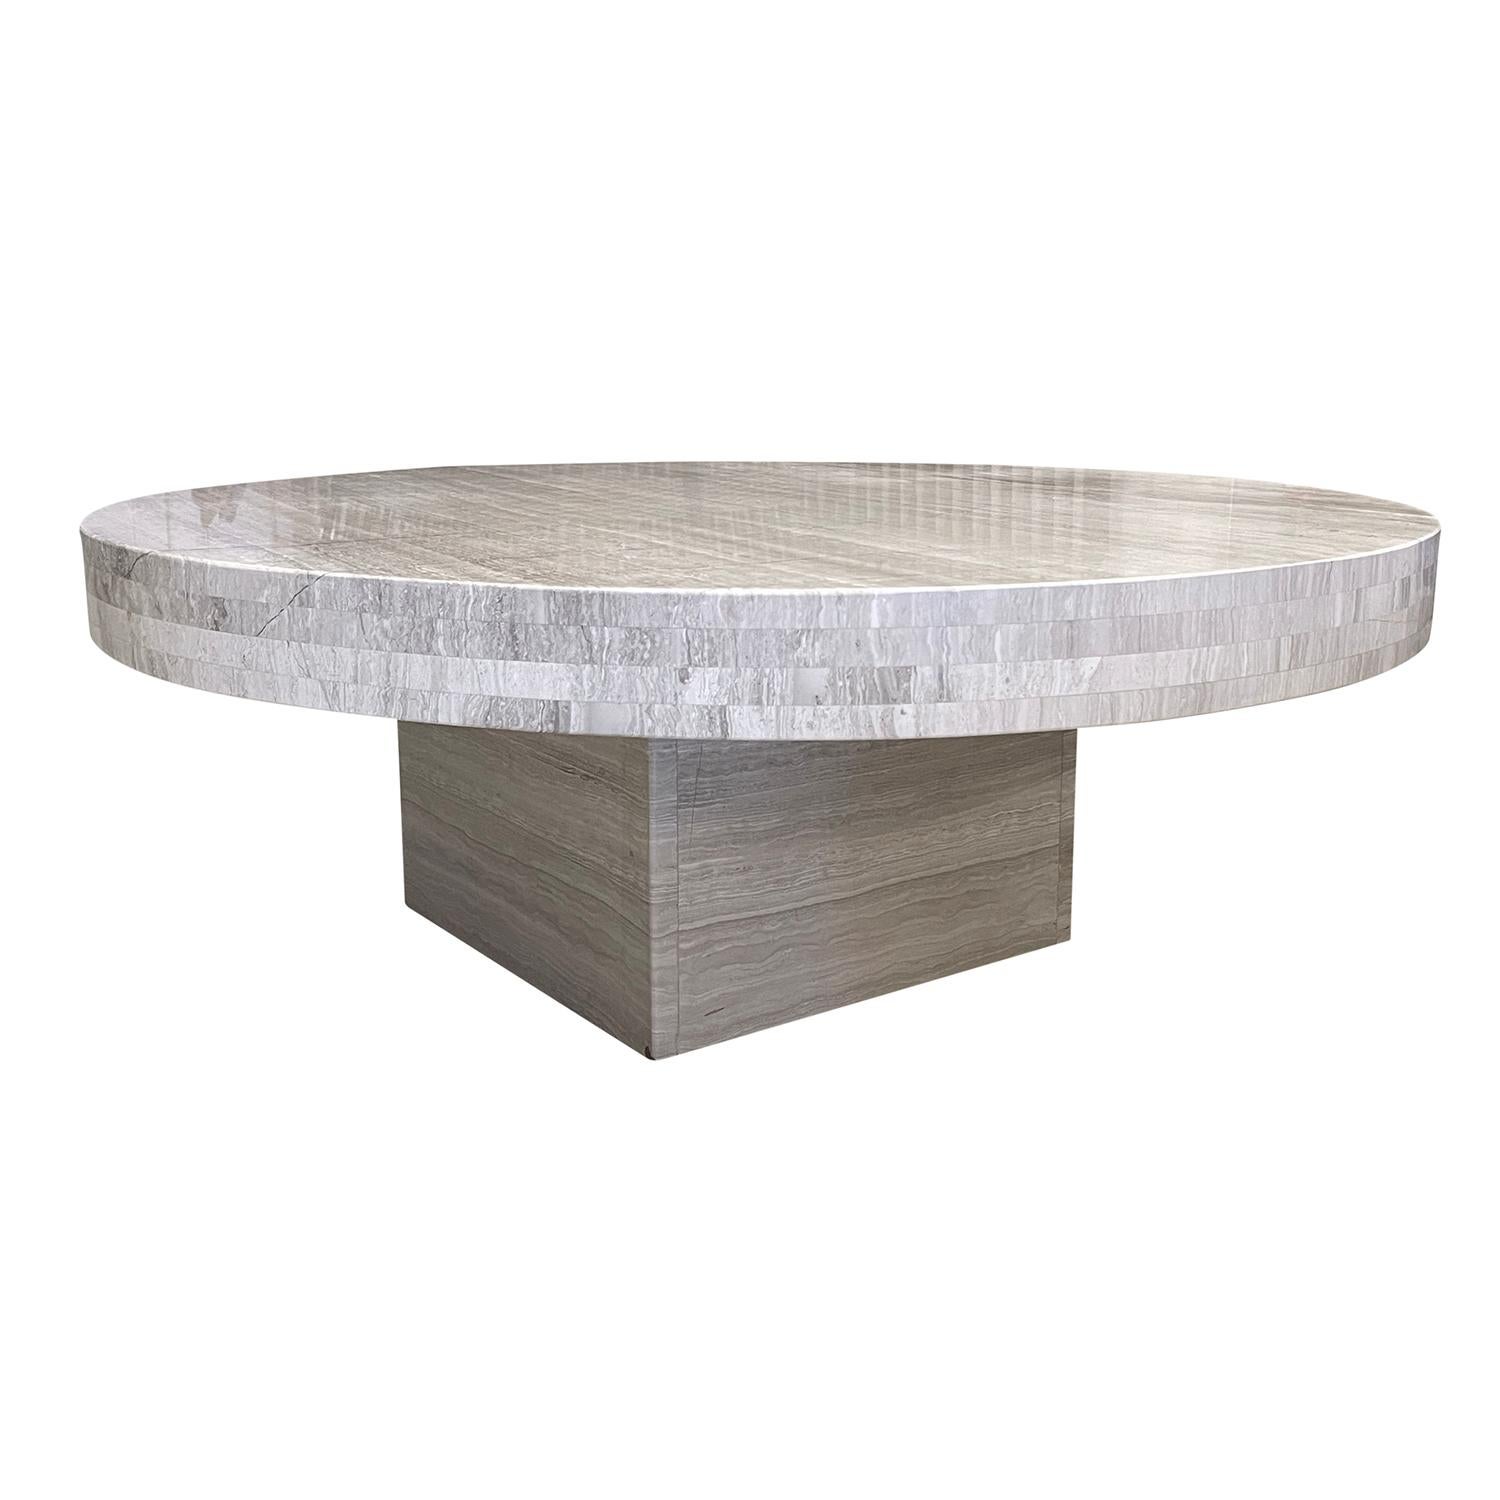 A round silver Italian coffee, side table made of hand crafted Travertine with a 3” thick top edging and a 0.75